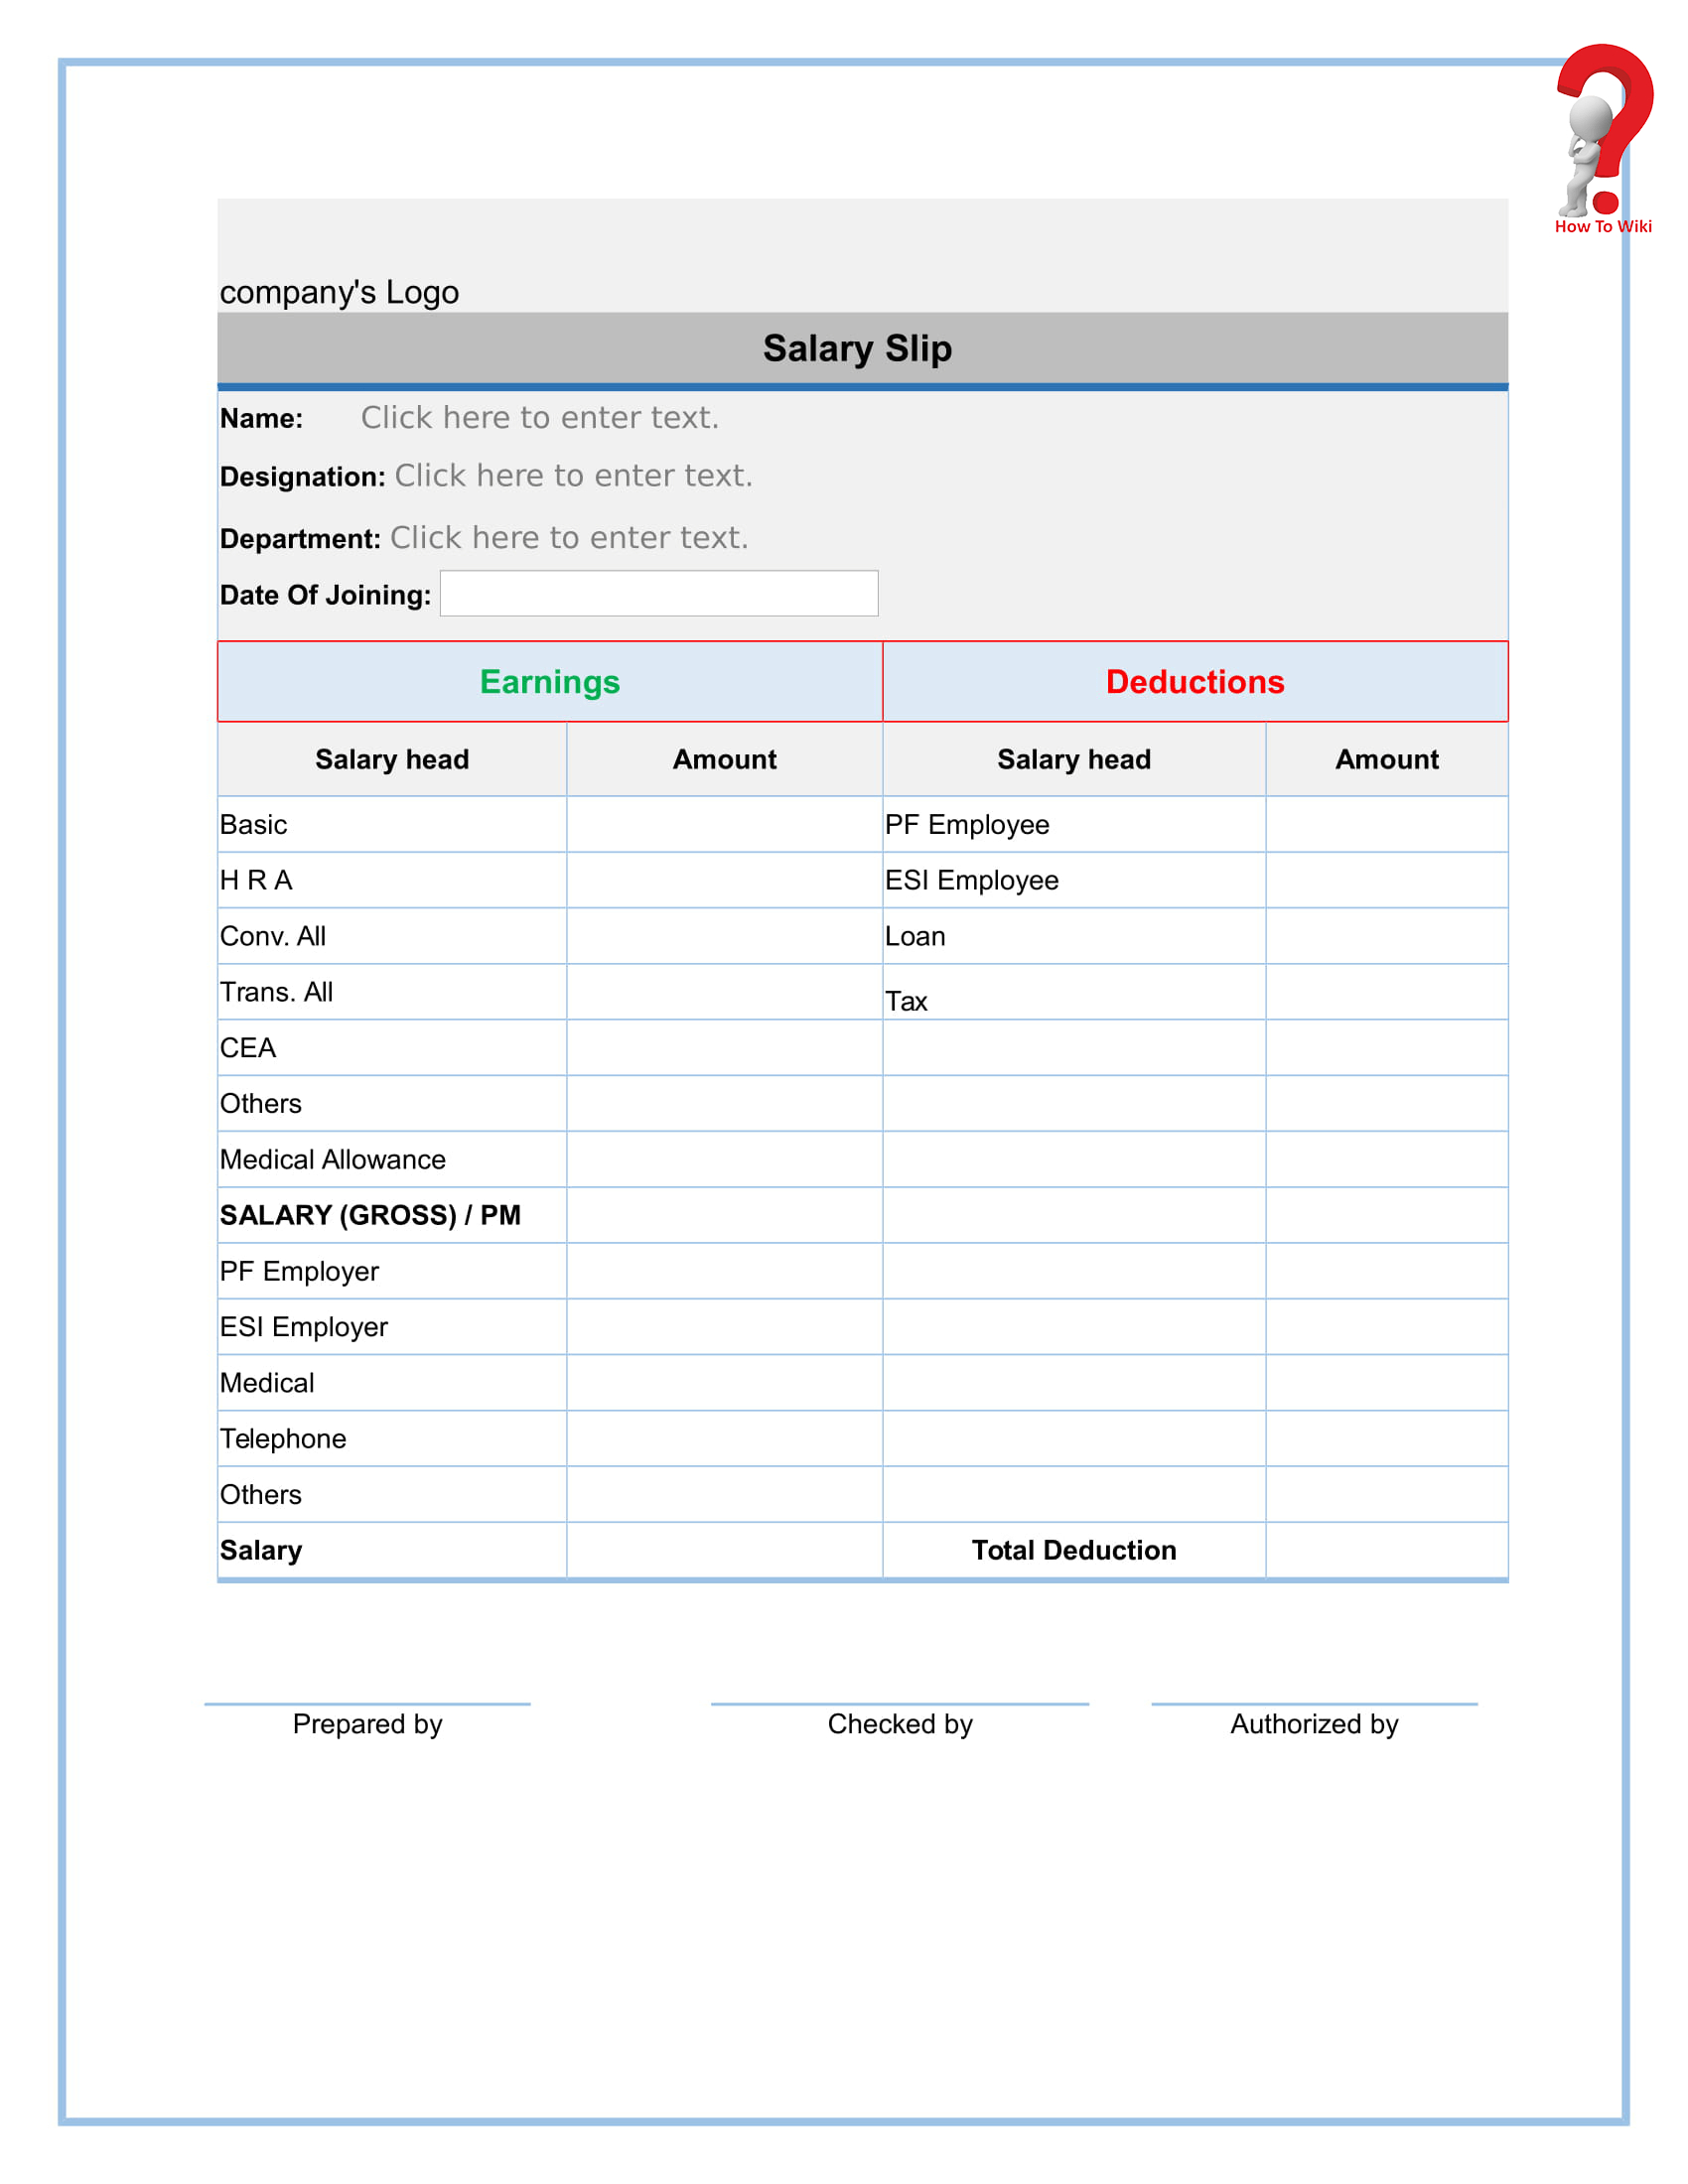 Free Blank Payslip Template 1 | How To Wiki For Blank Payslip Template